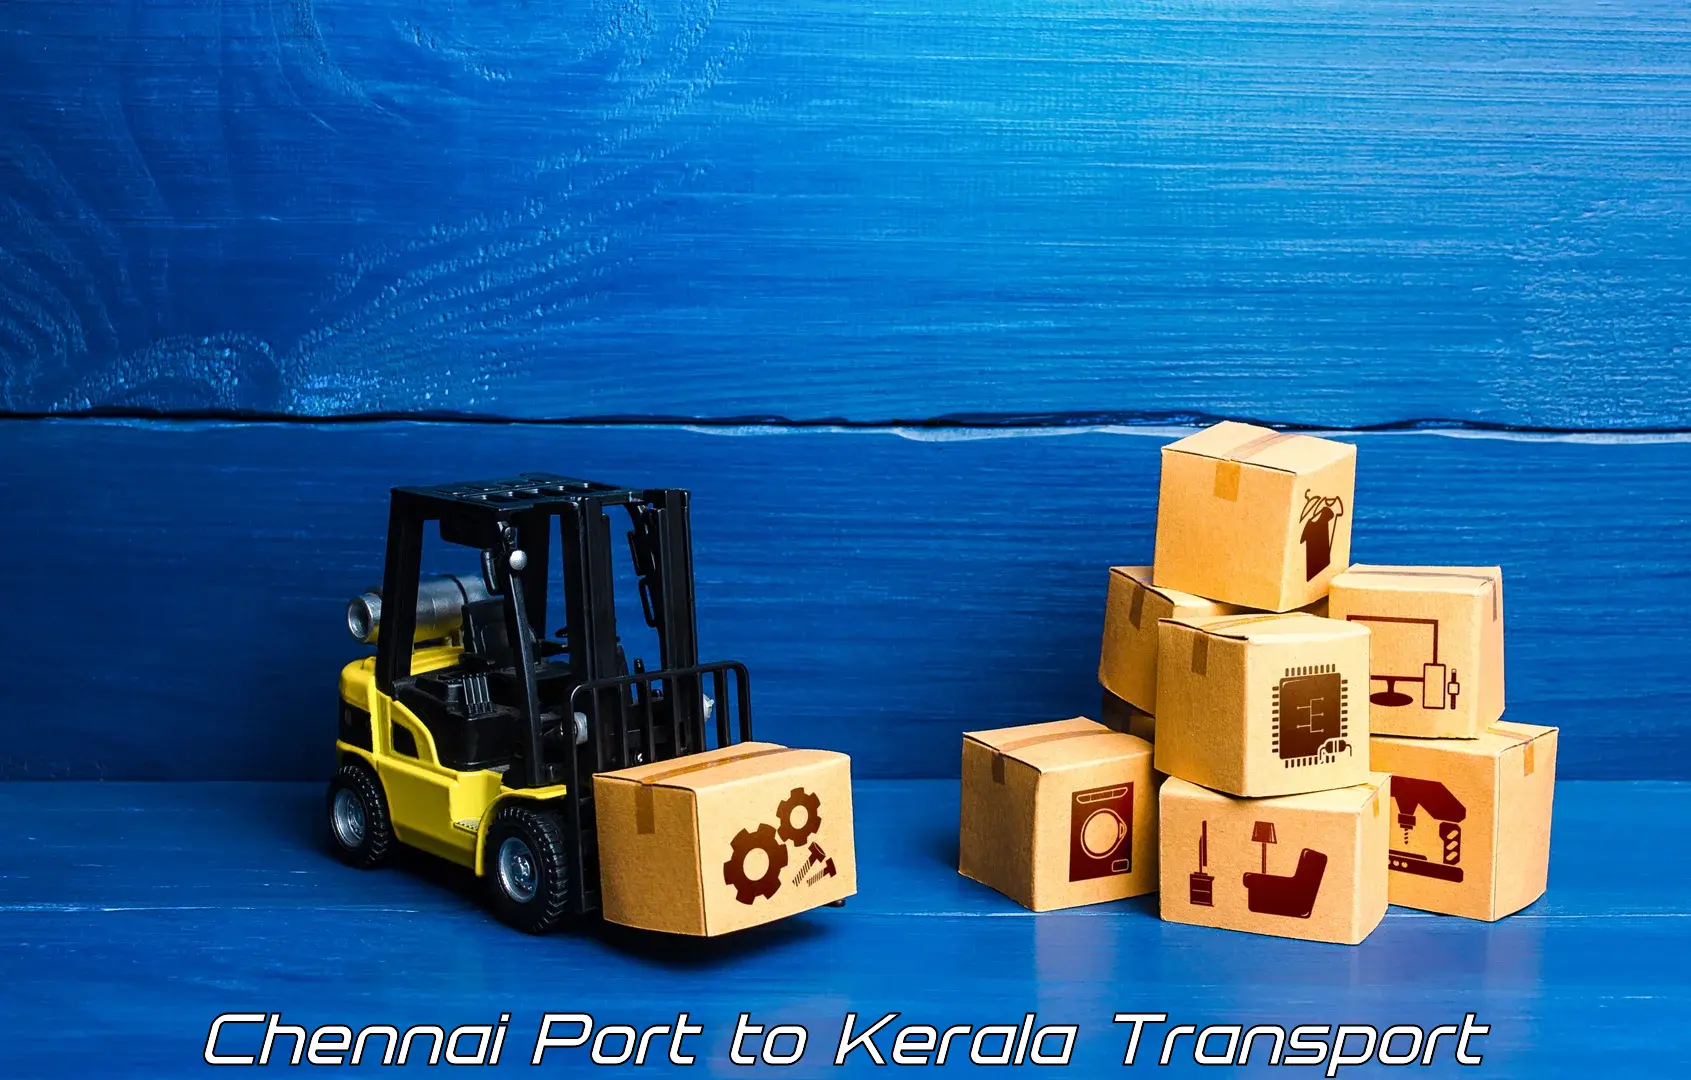 Daily parcel service transport in Chennai Port to Kottayam